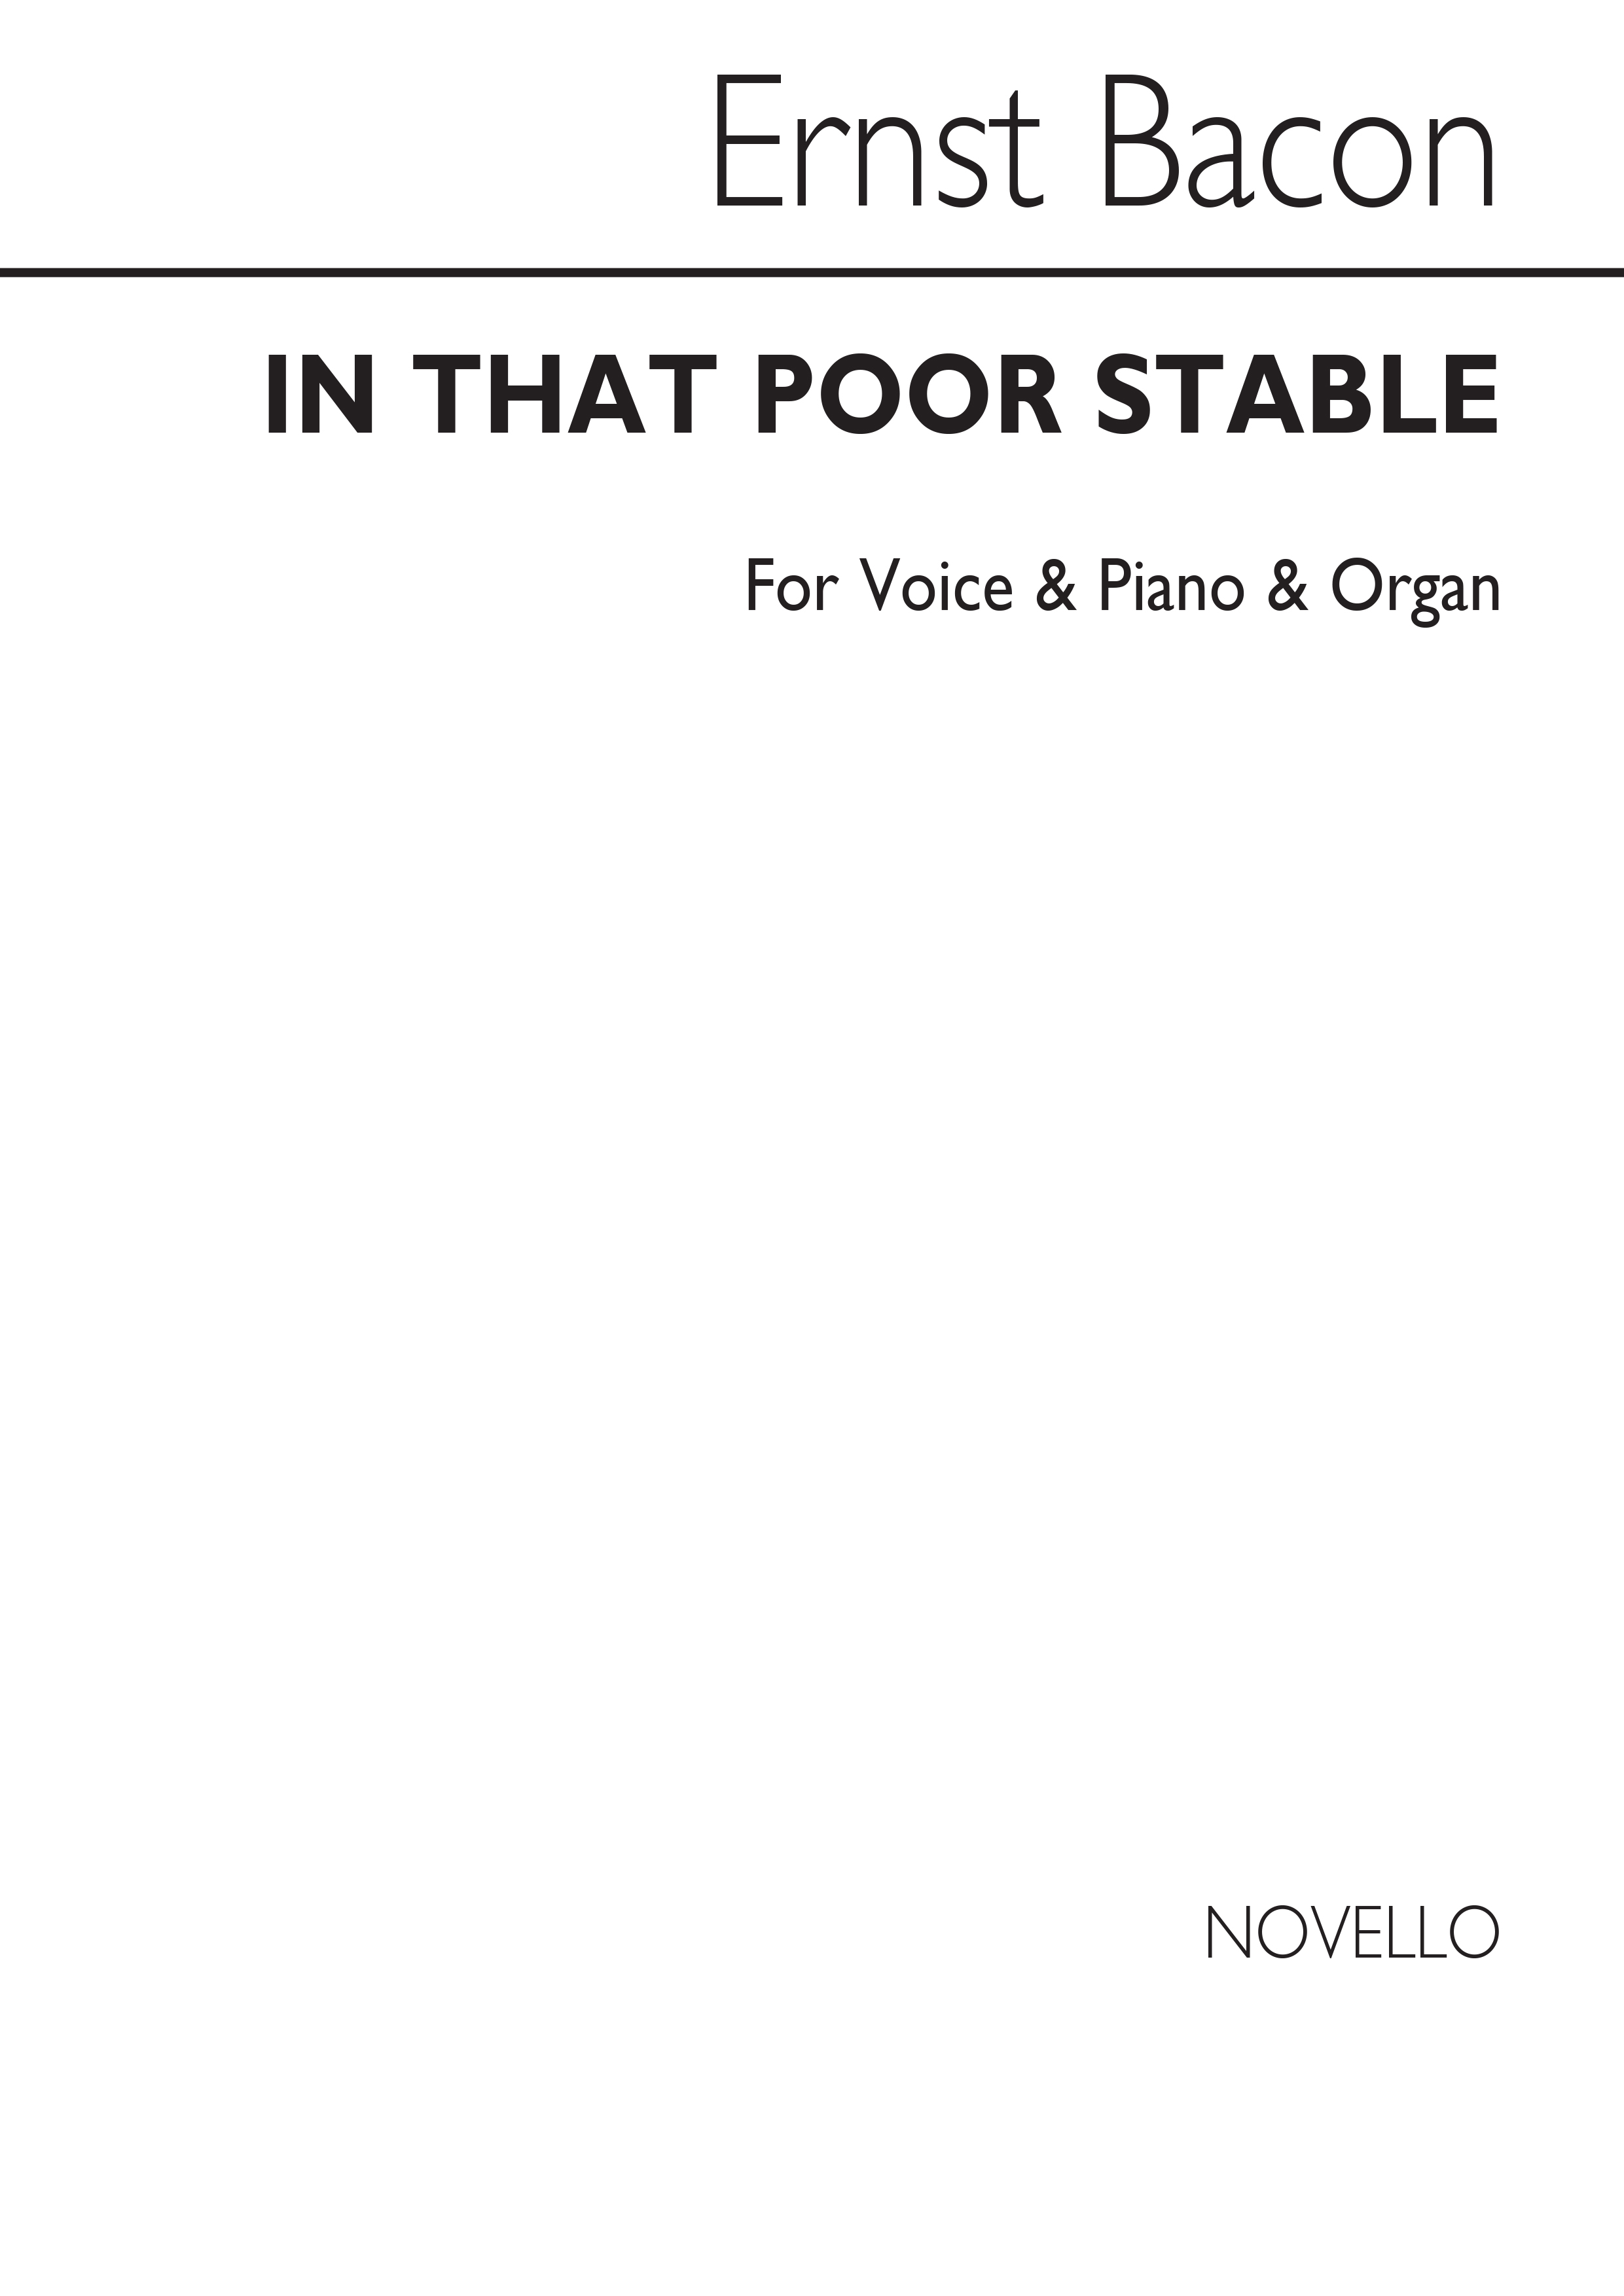 Ernst Bacon: In That Poor Stable